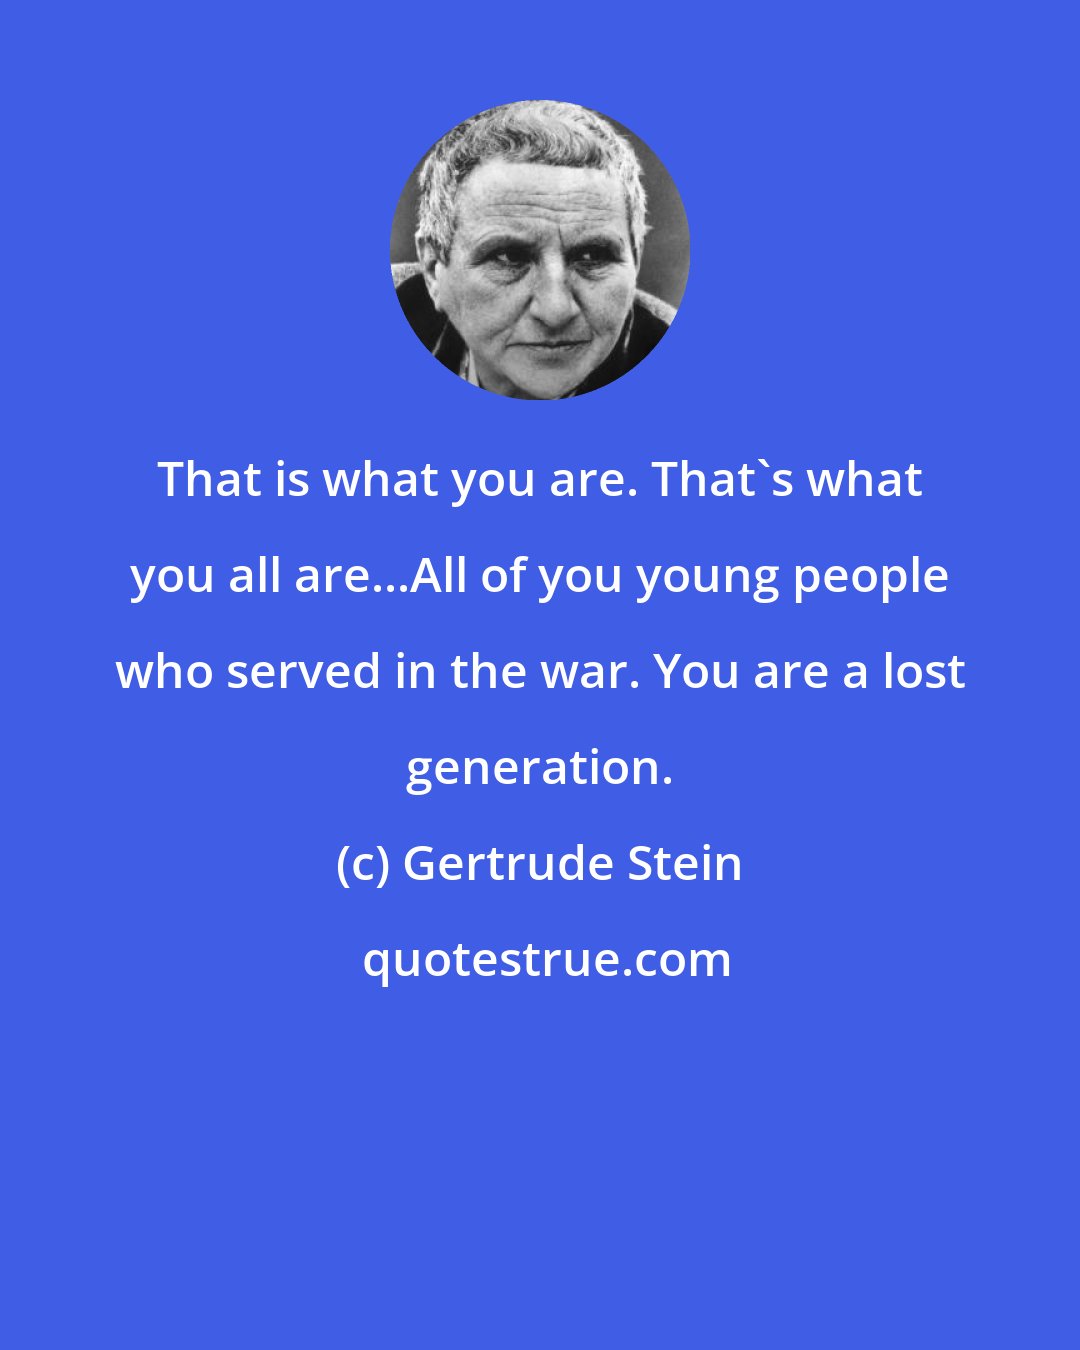 Gertrude Stein: That is what you are. That's what you all are...All of you young people who served in the war. You are a lost generation.